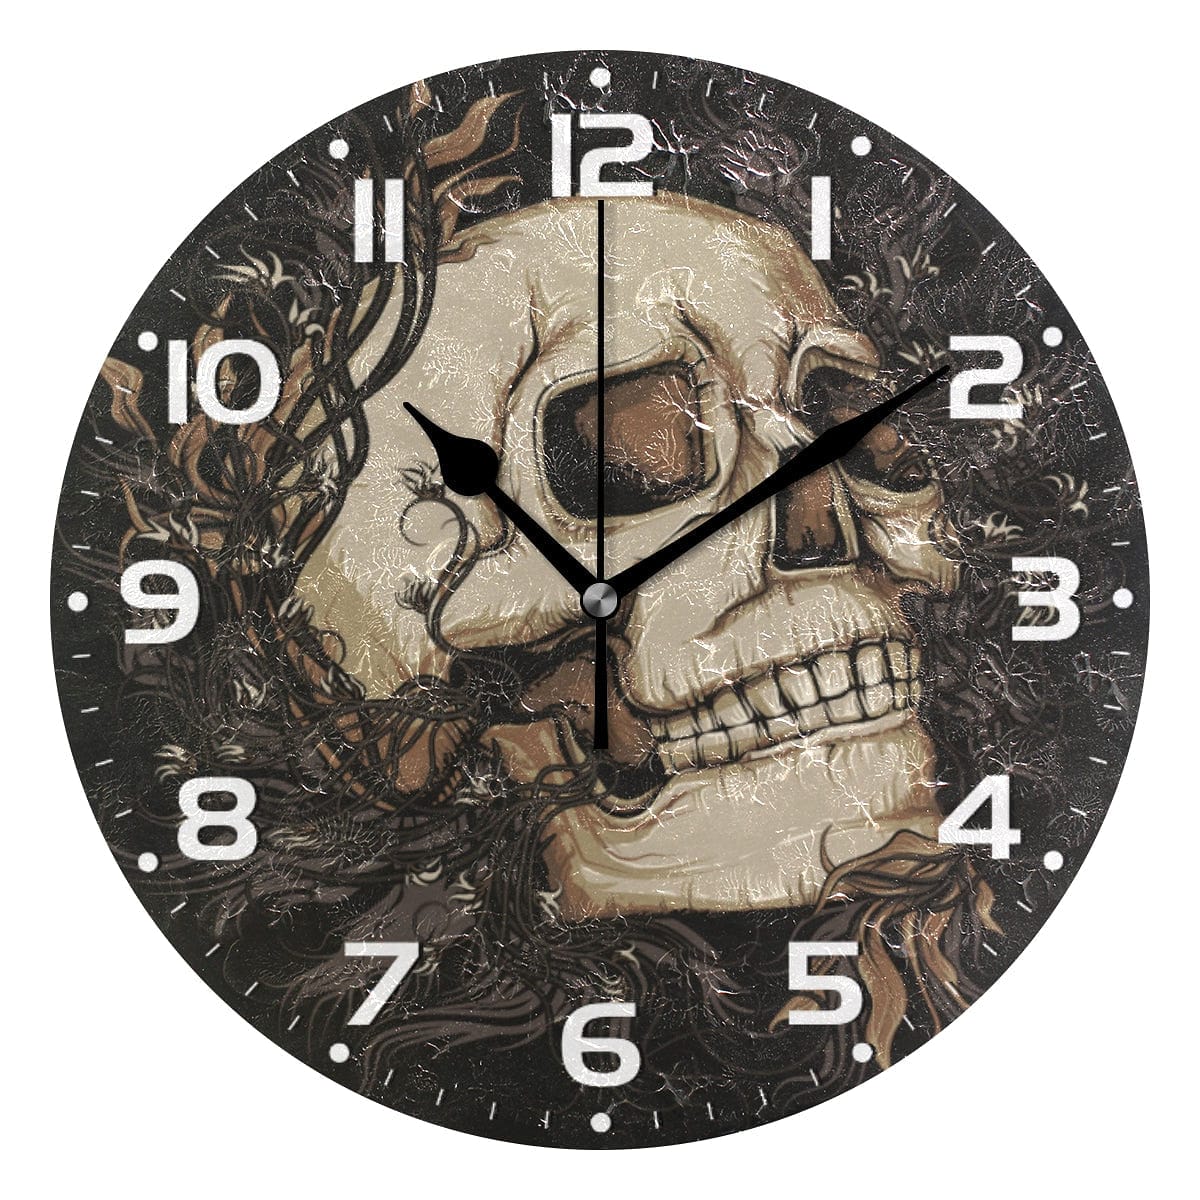 Skull Face Pattern Round Wall Clock Battery Operated